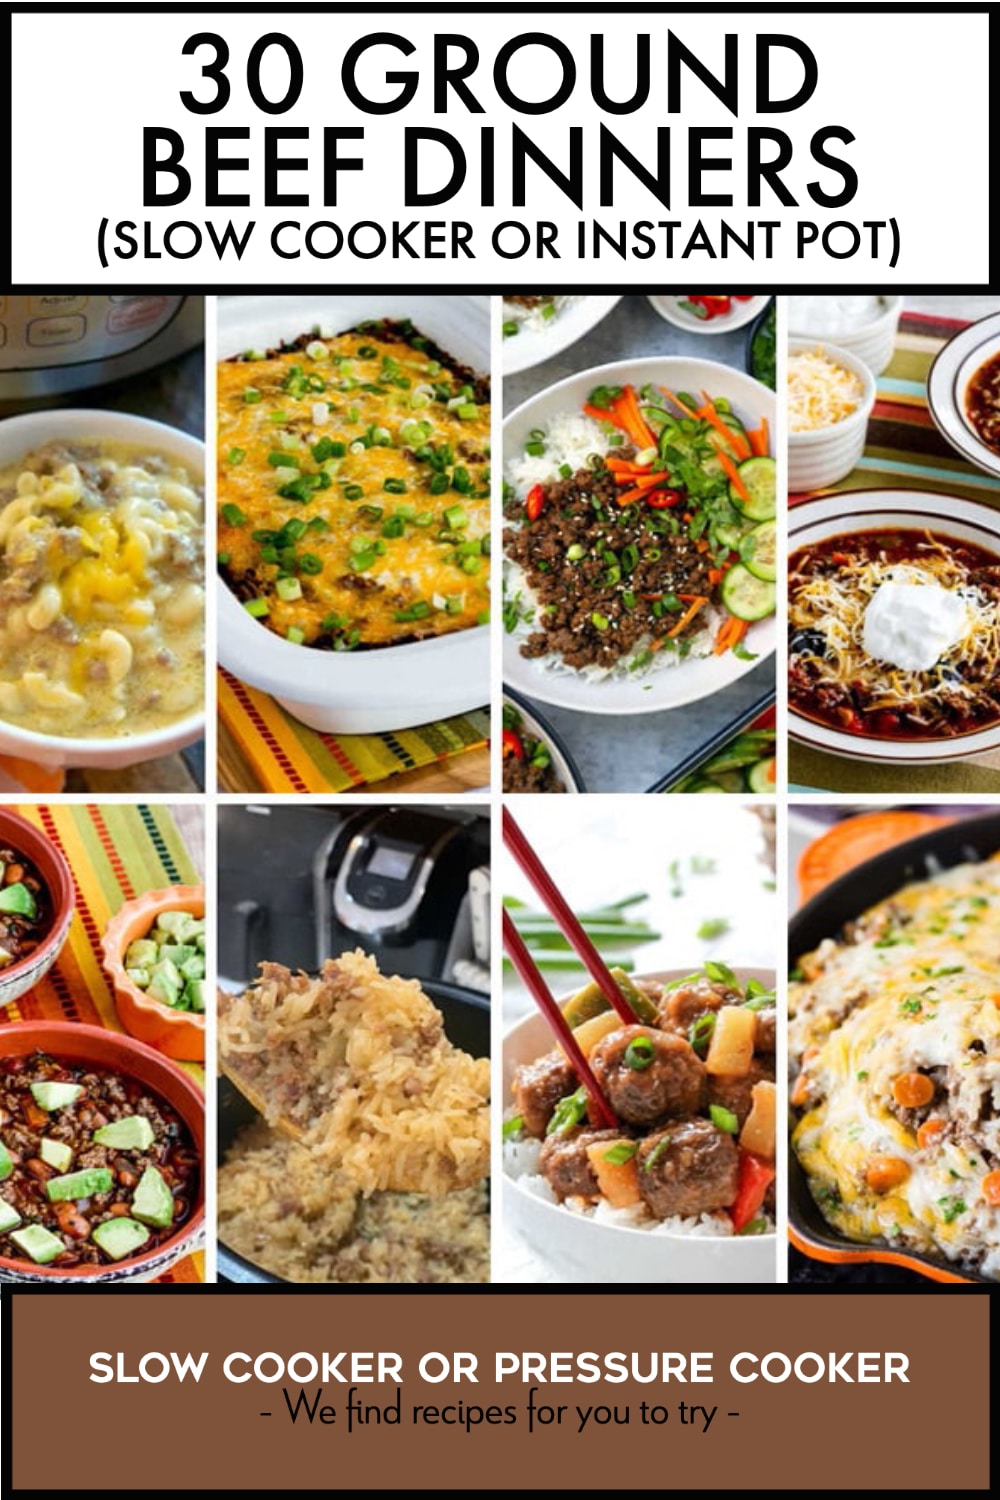 Pinterest image of 30 Ground Beef Dinners (Slow Cooker or Instant Pot)